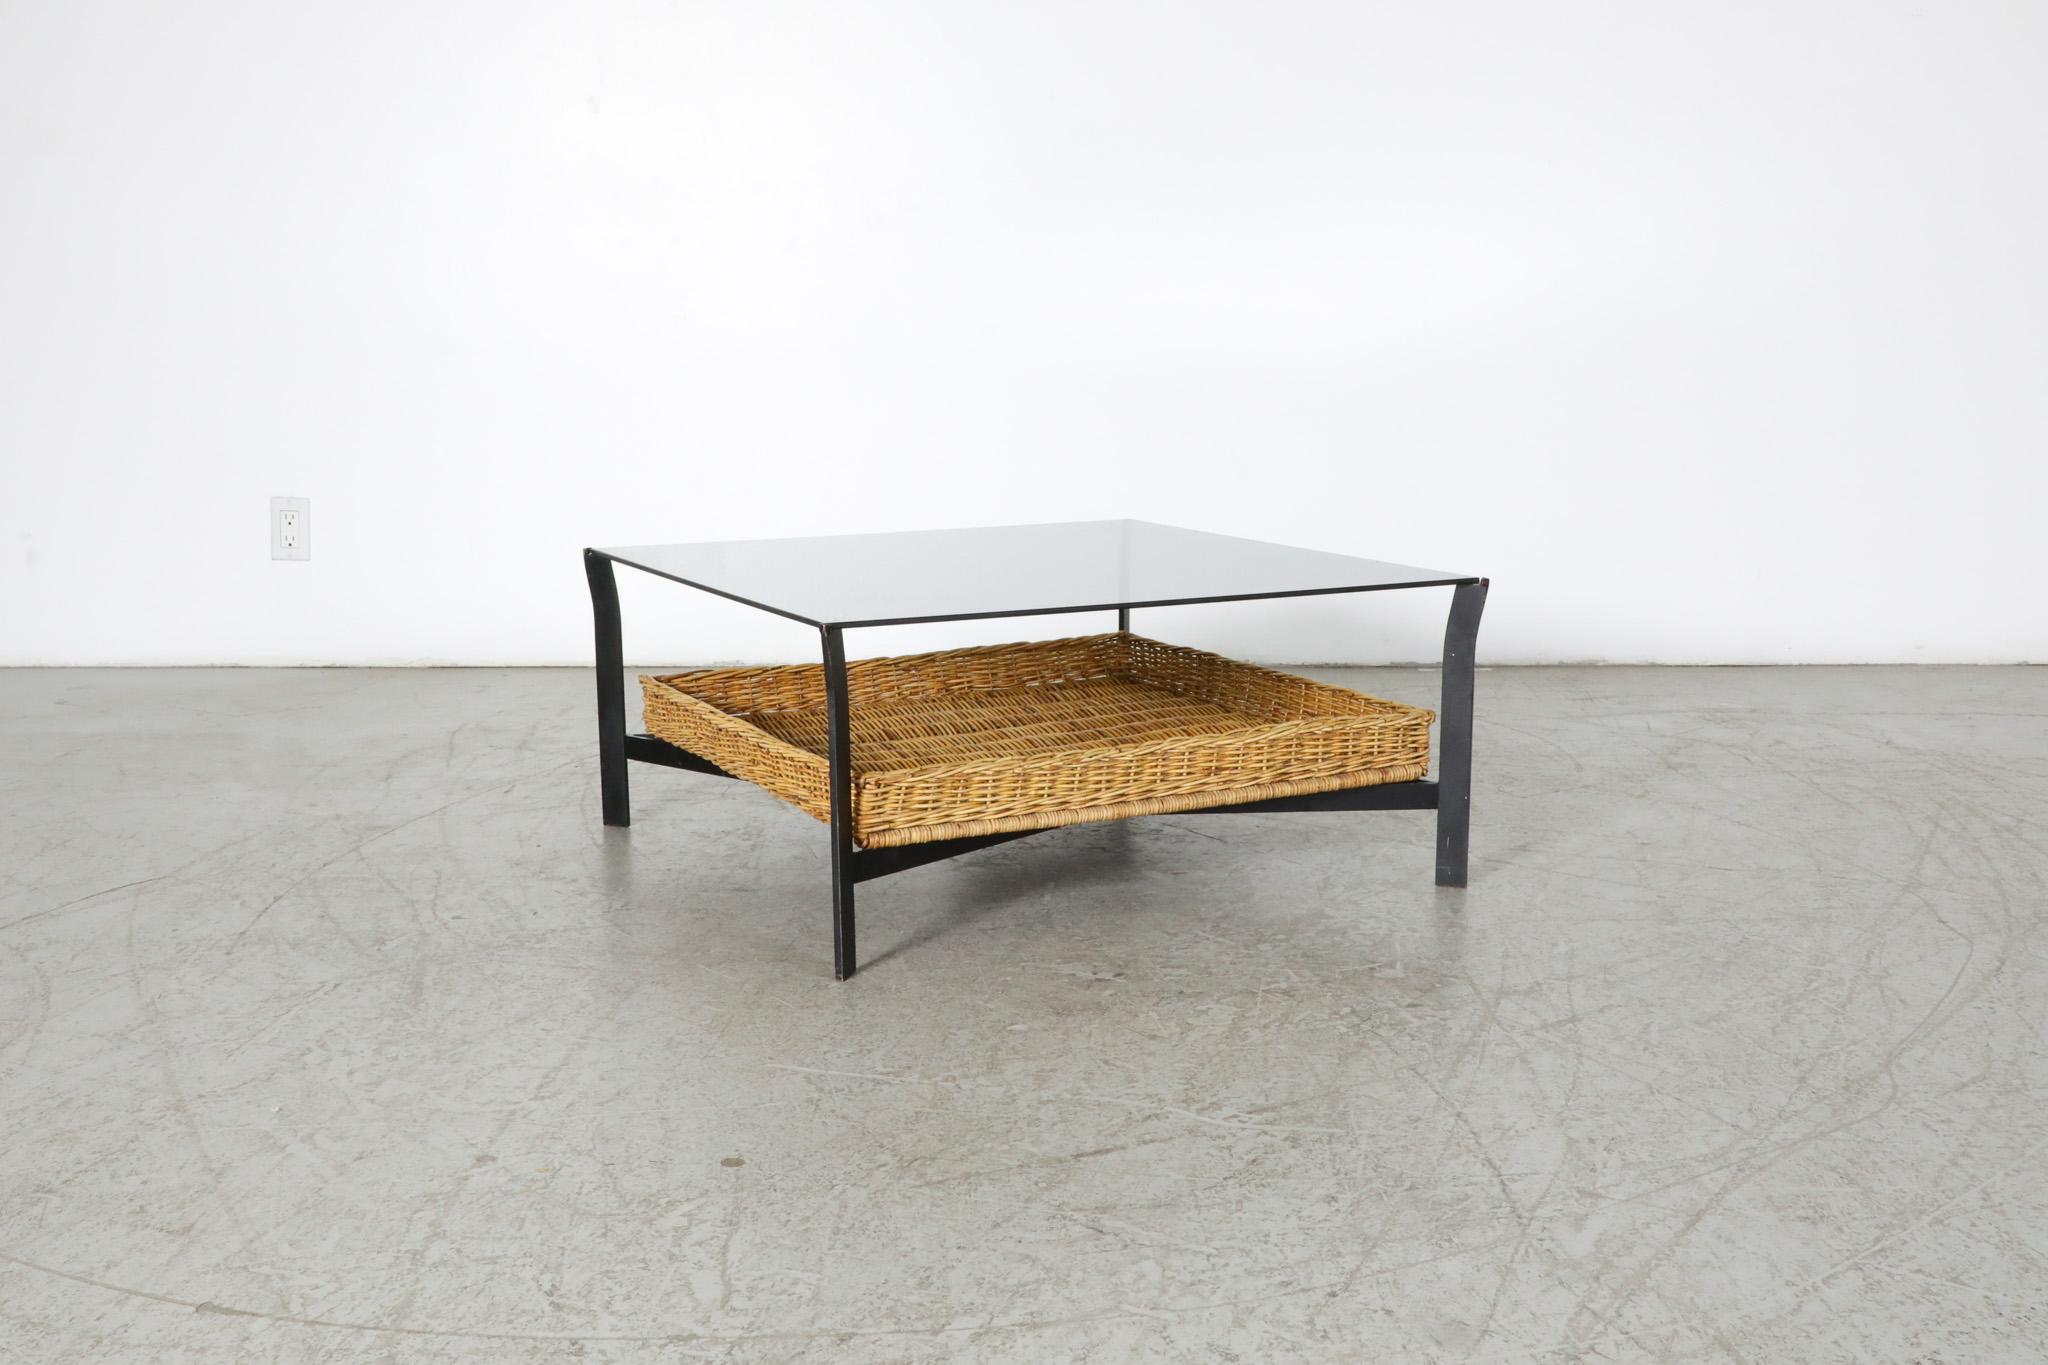 Modernist Rattan Metal and Glass Coffee Table with Lower Basket In Good Condition For Sale In Los Angeles, CA